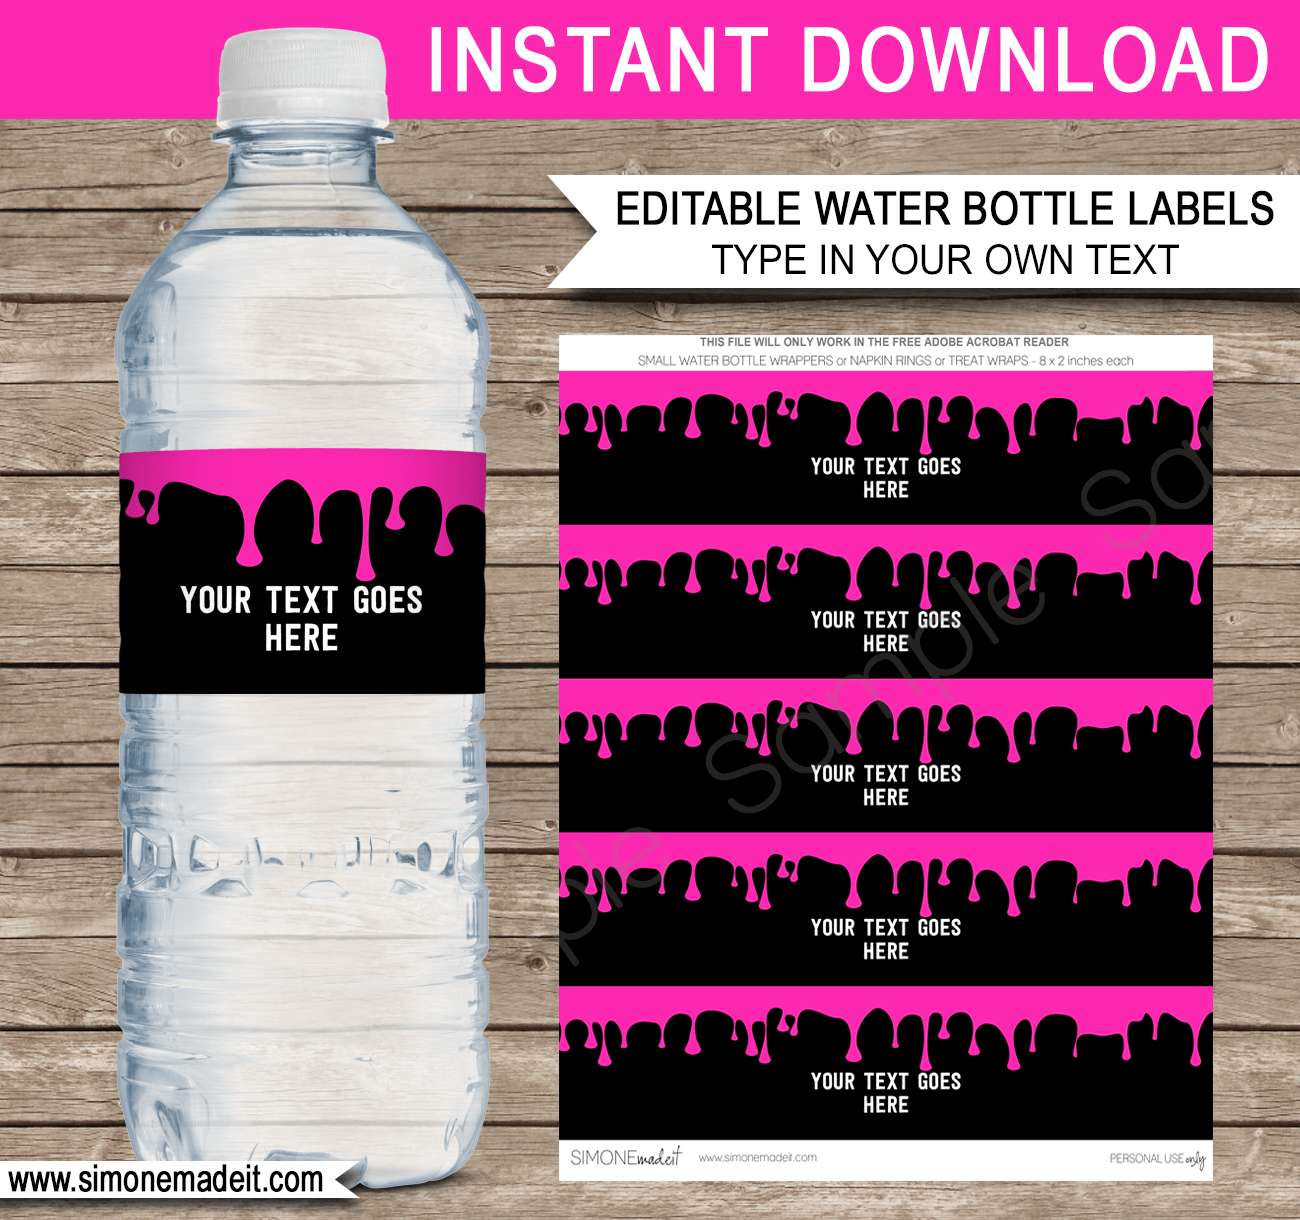 Bottle Label Template Free from www.simonemadeit.com